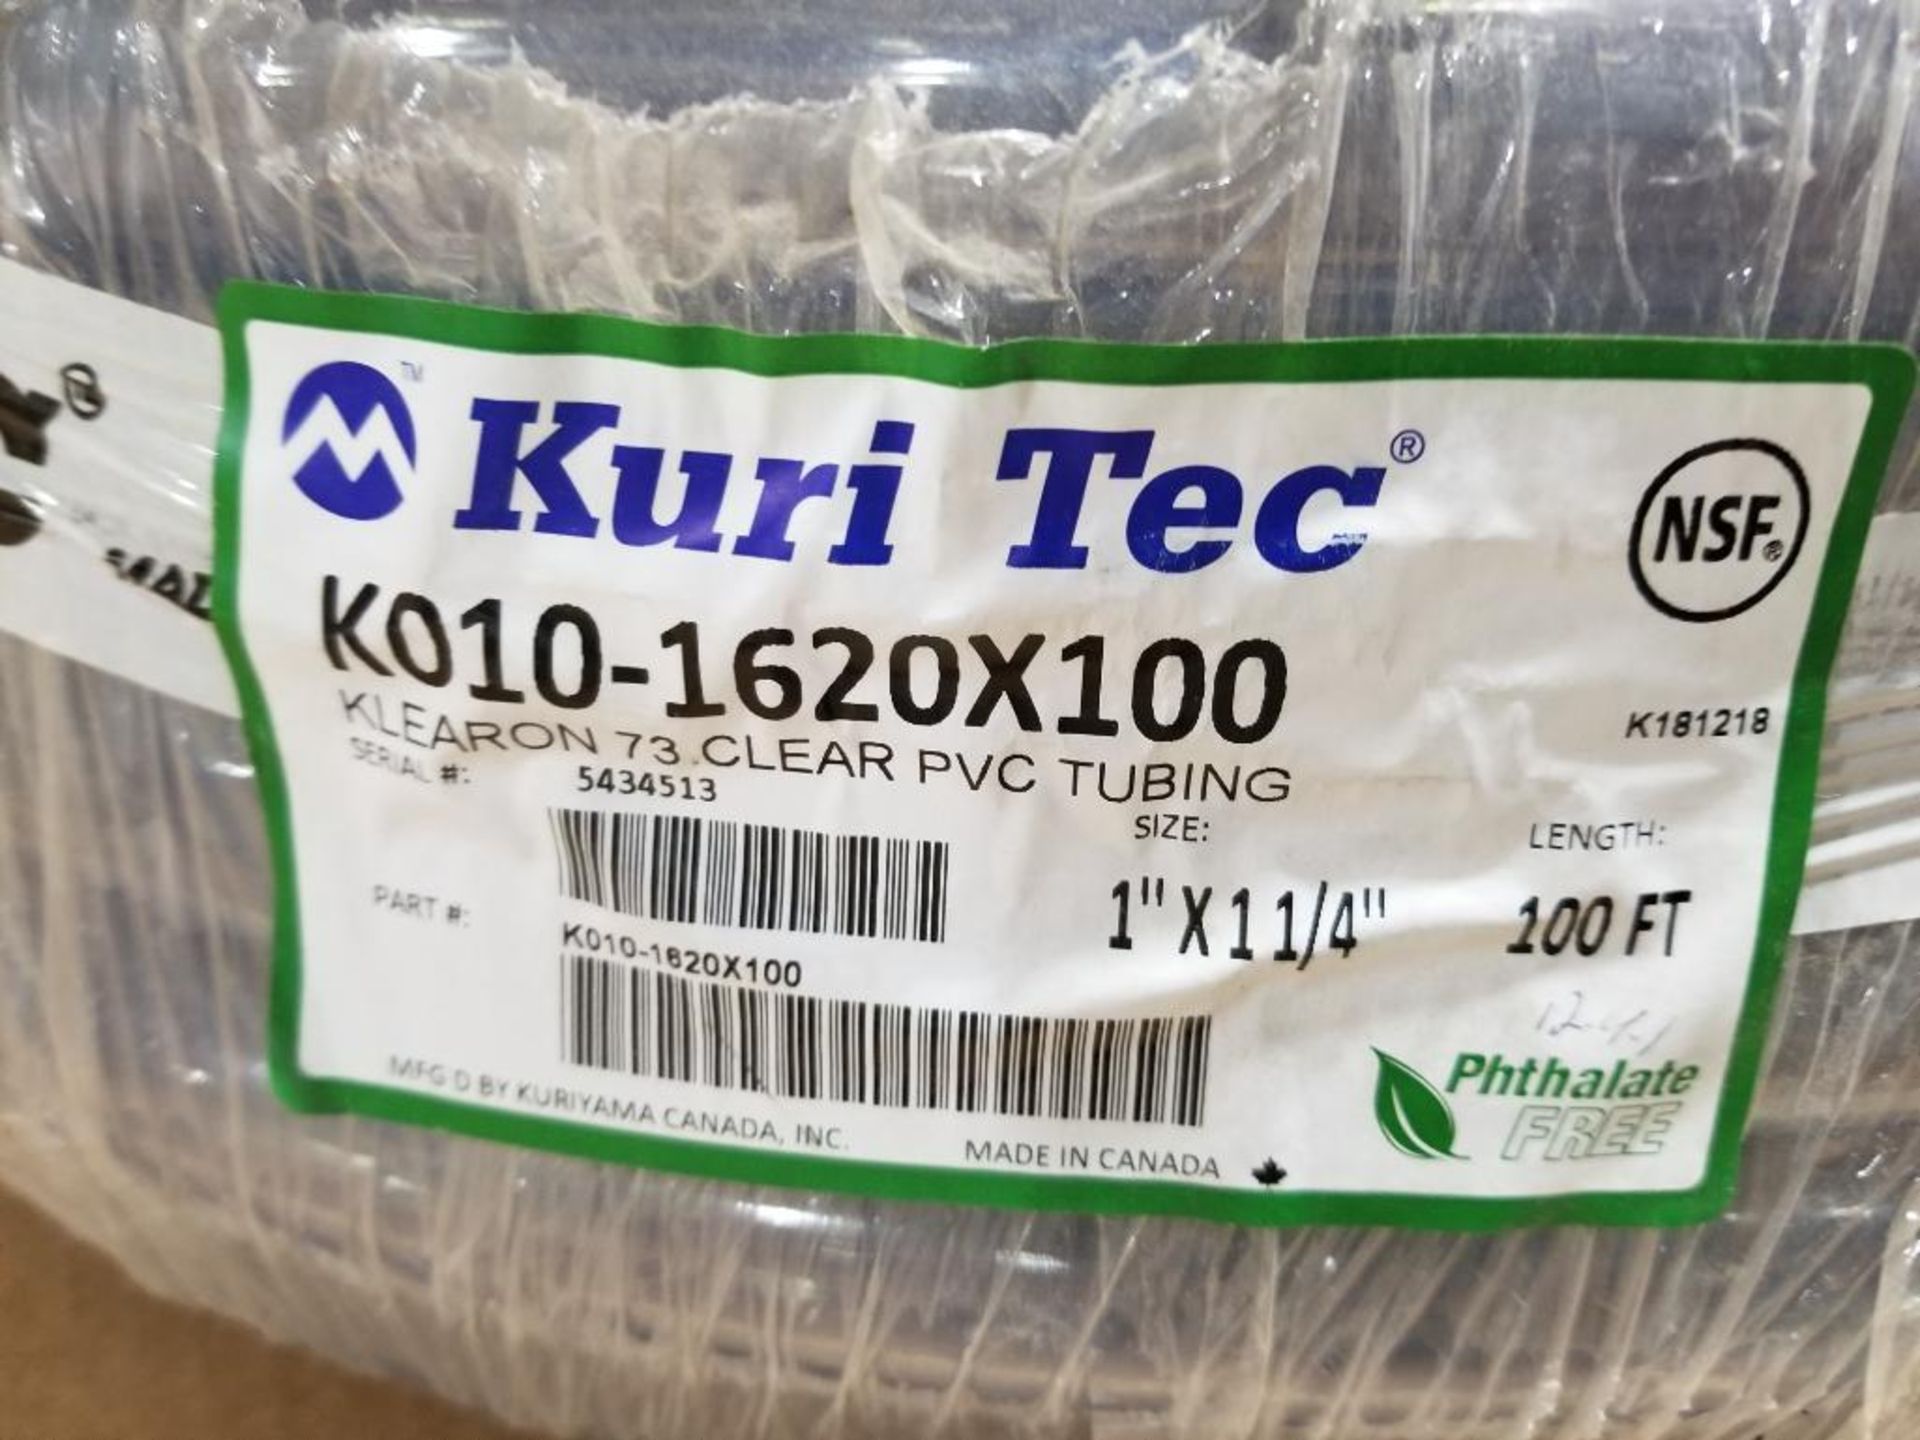 Qty 200 ft - Kuri-Tec clear PVC tubing. 1in x 1 1/4in. 2 boxes of 100ft. Part number K010-1620X100. - Image 3 of 6